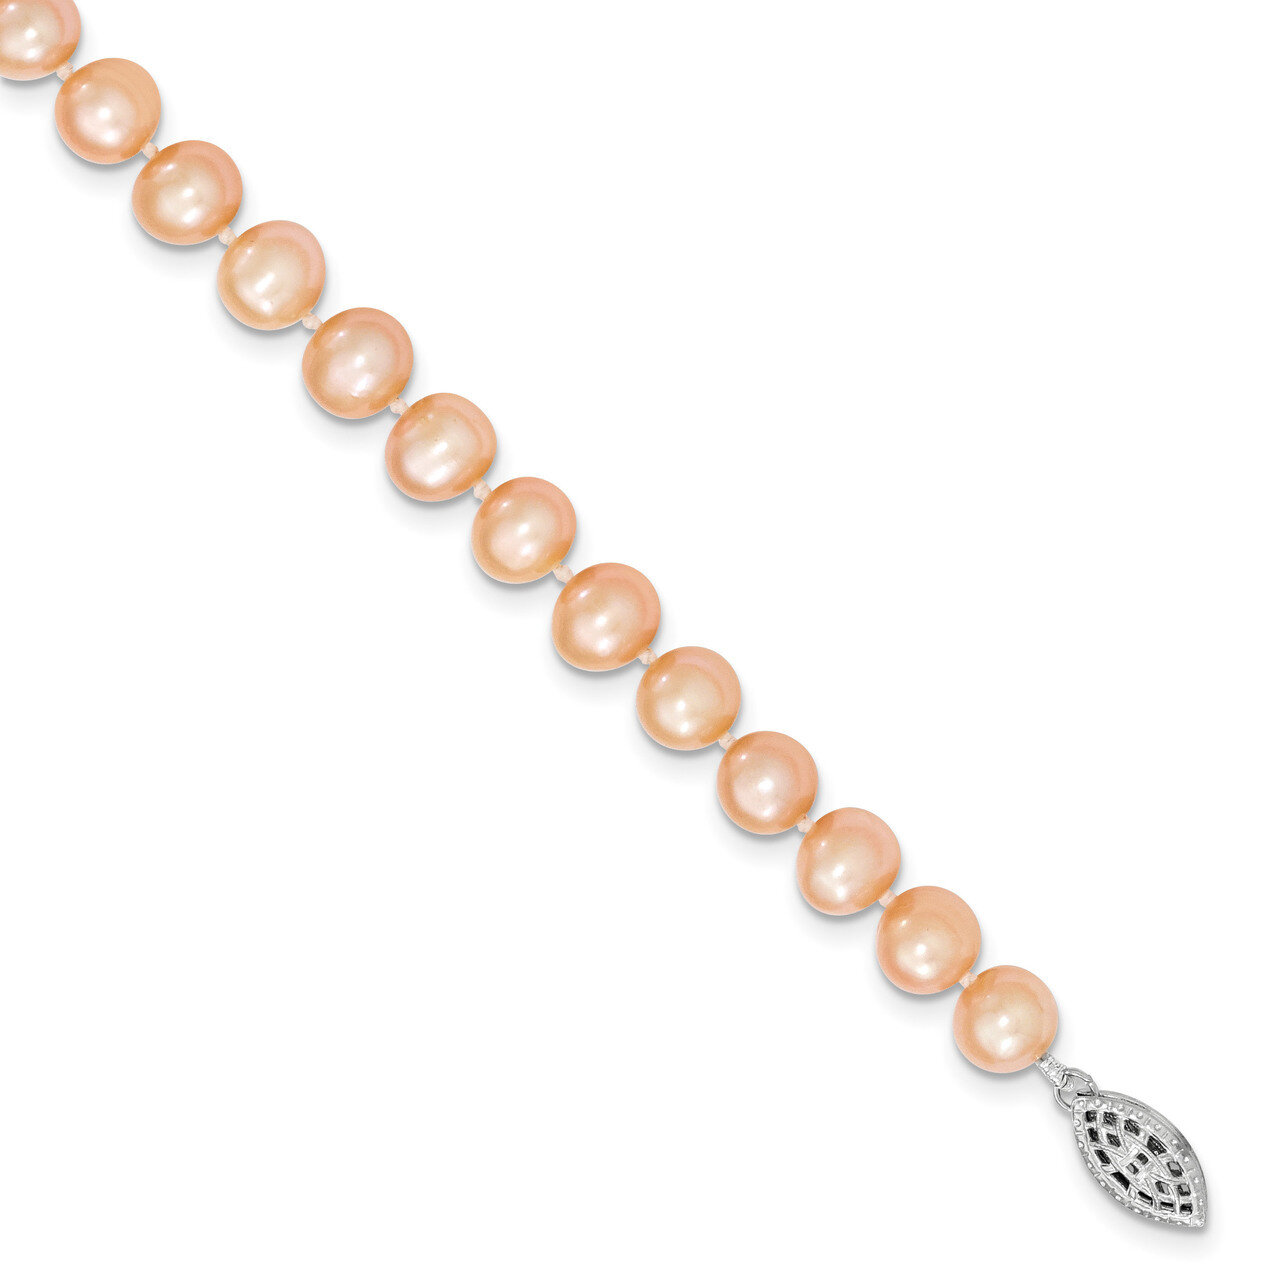 7-8mm Pink Cultured Freshwater Pearl Necklace 20 Inch Sterling Silver Rhodium-plated QH5167-20